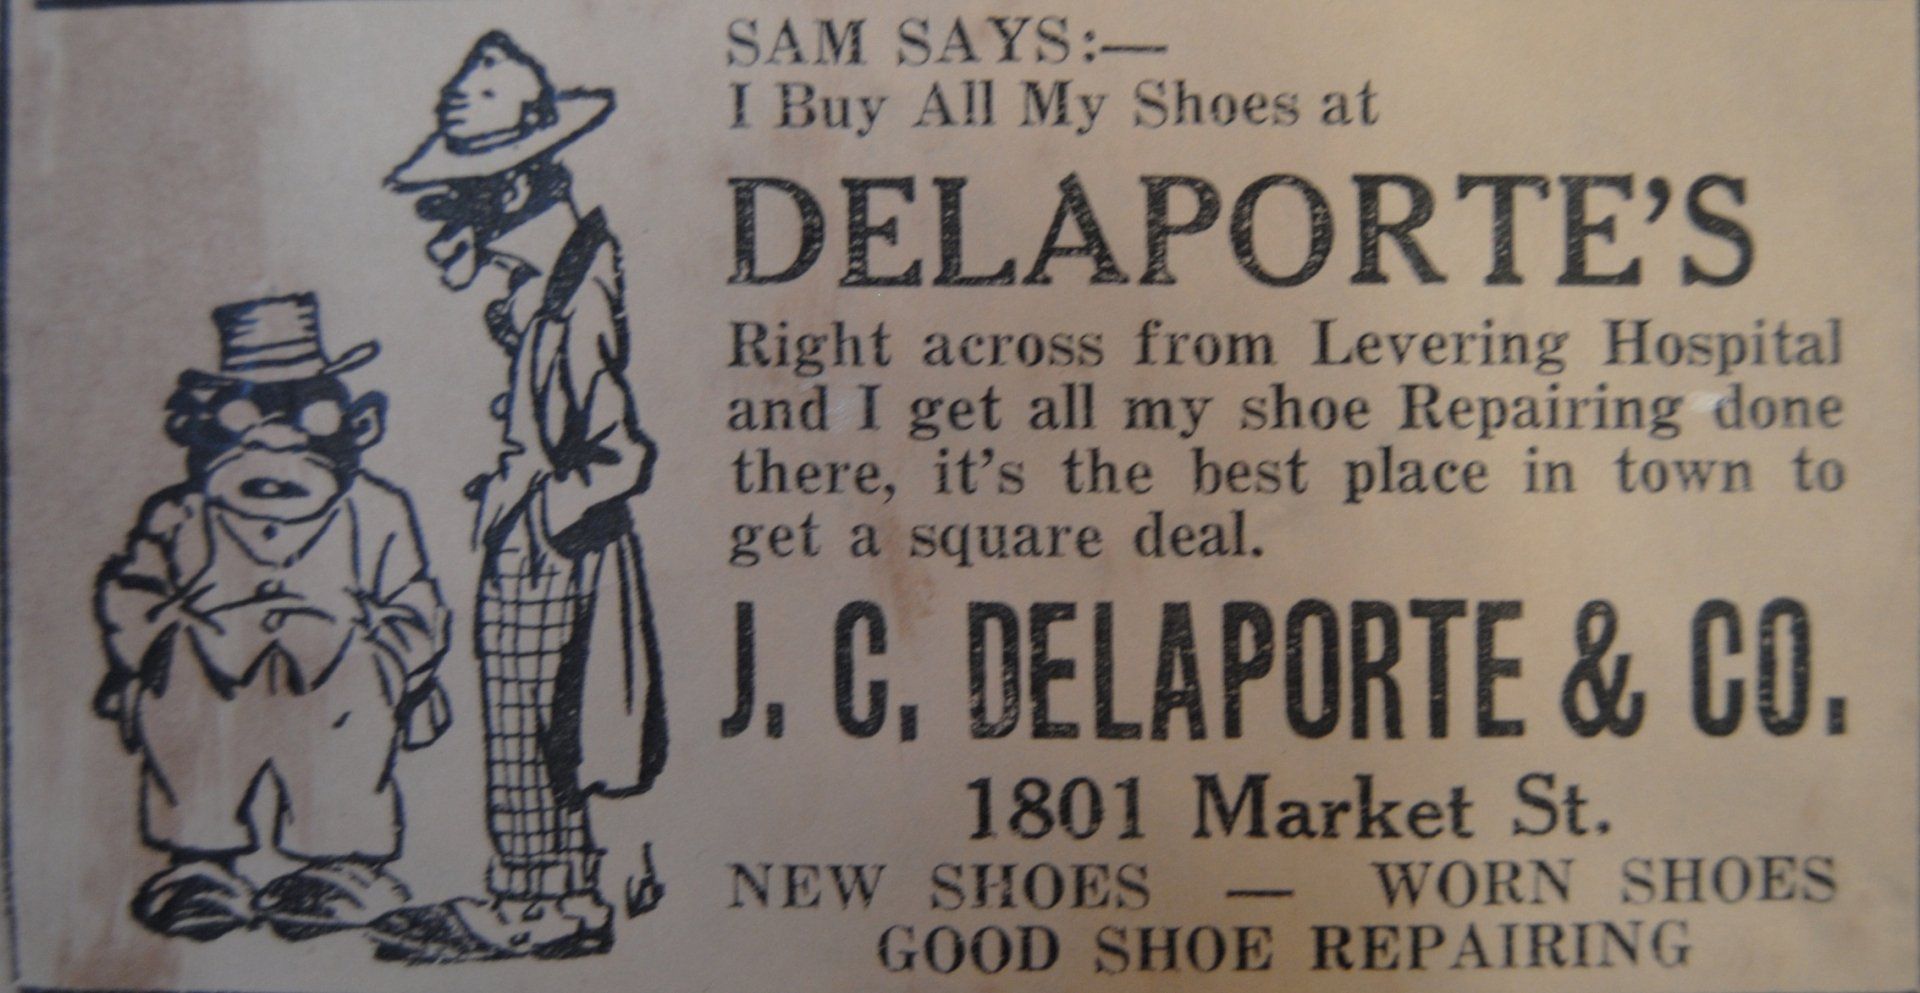 A WHITE MERCHANT'S AD FROM THE HANNIBAL 1927 COLORED DIRECTORY